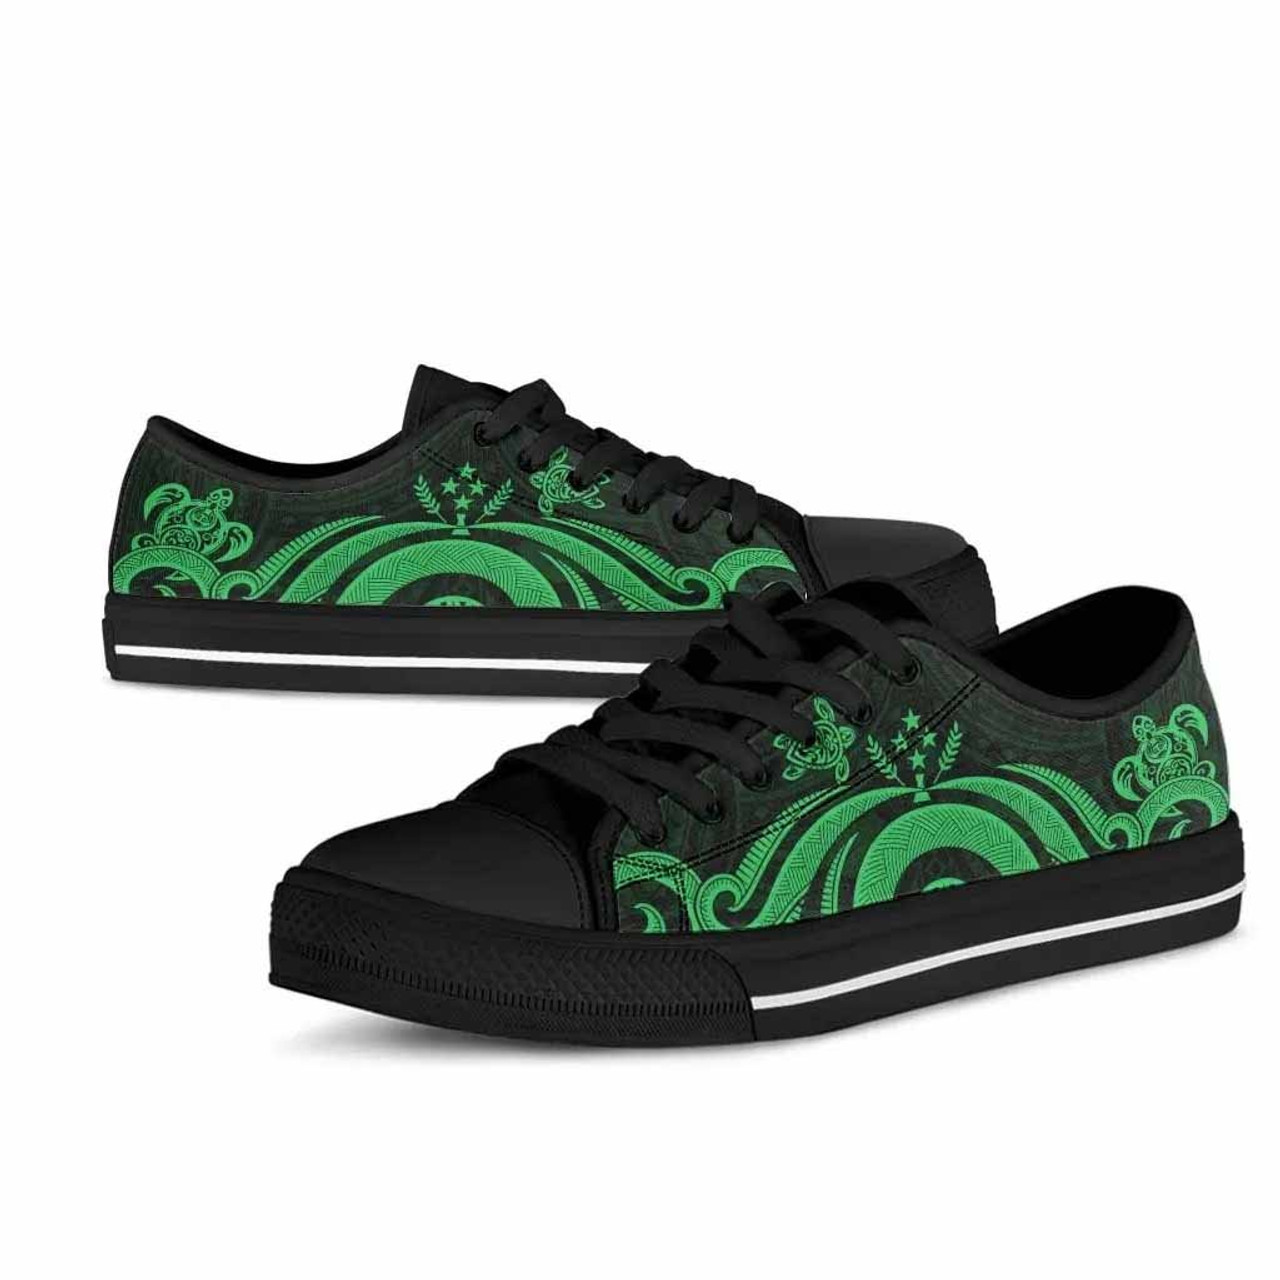 Kosrae Low Top Canvas Shoes - Green Tentacle Turtle 4